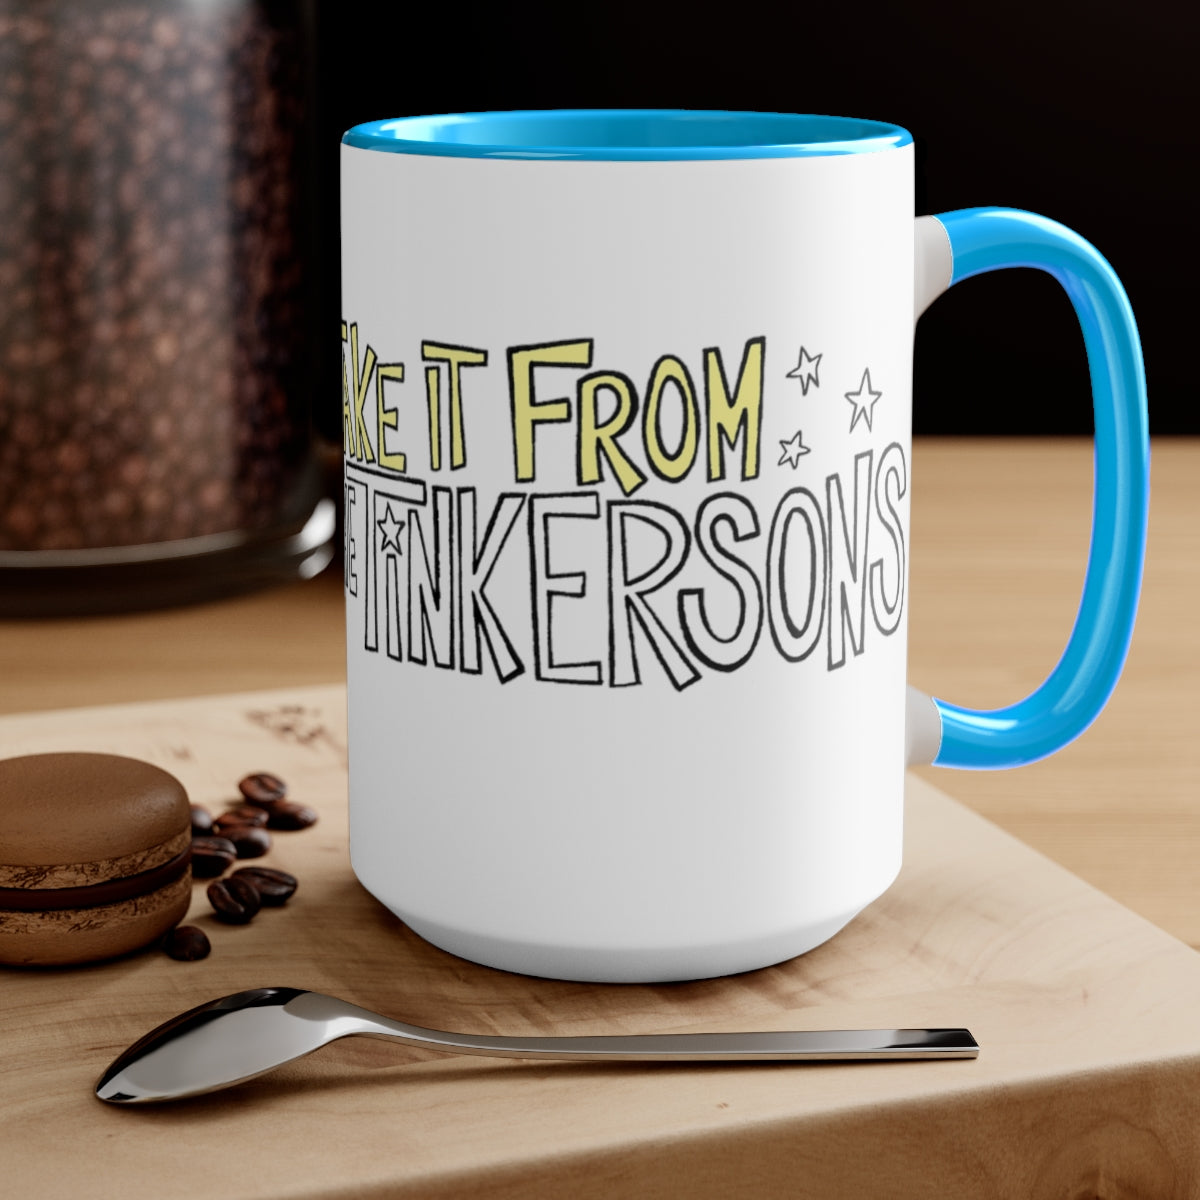 TAKE IT FROM THE TINKERSONS Two-Tone Mug, 15oz